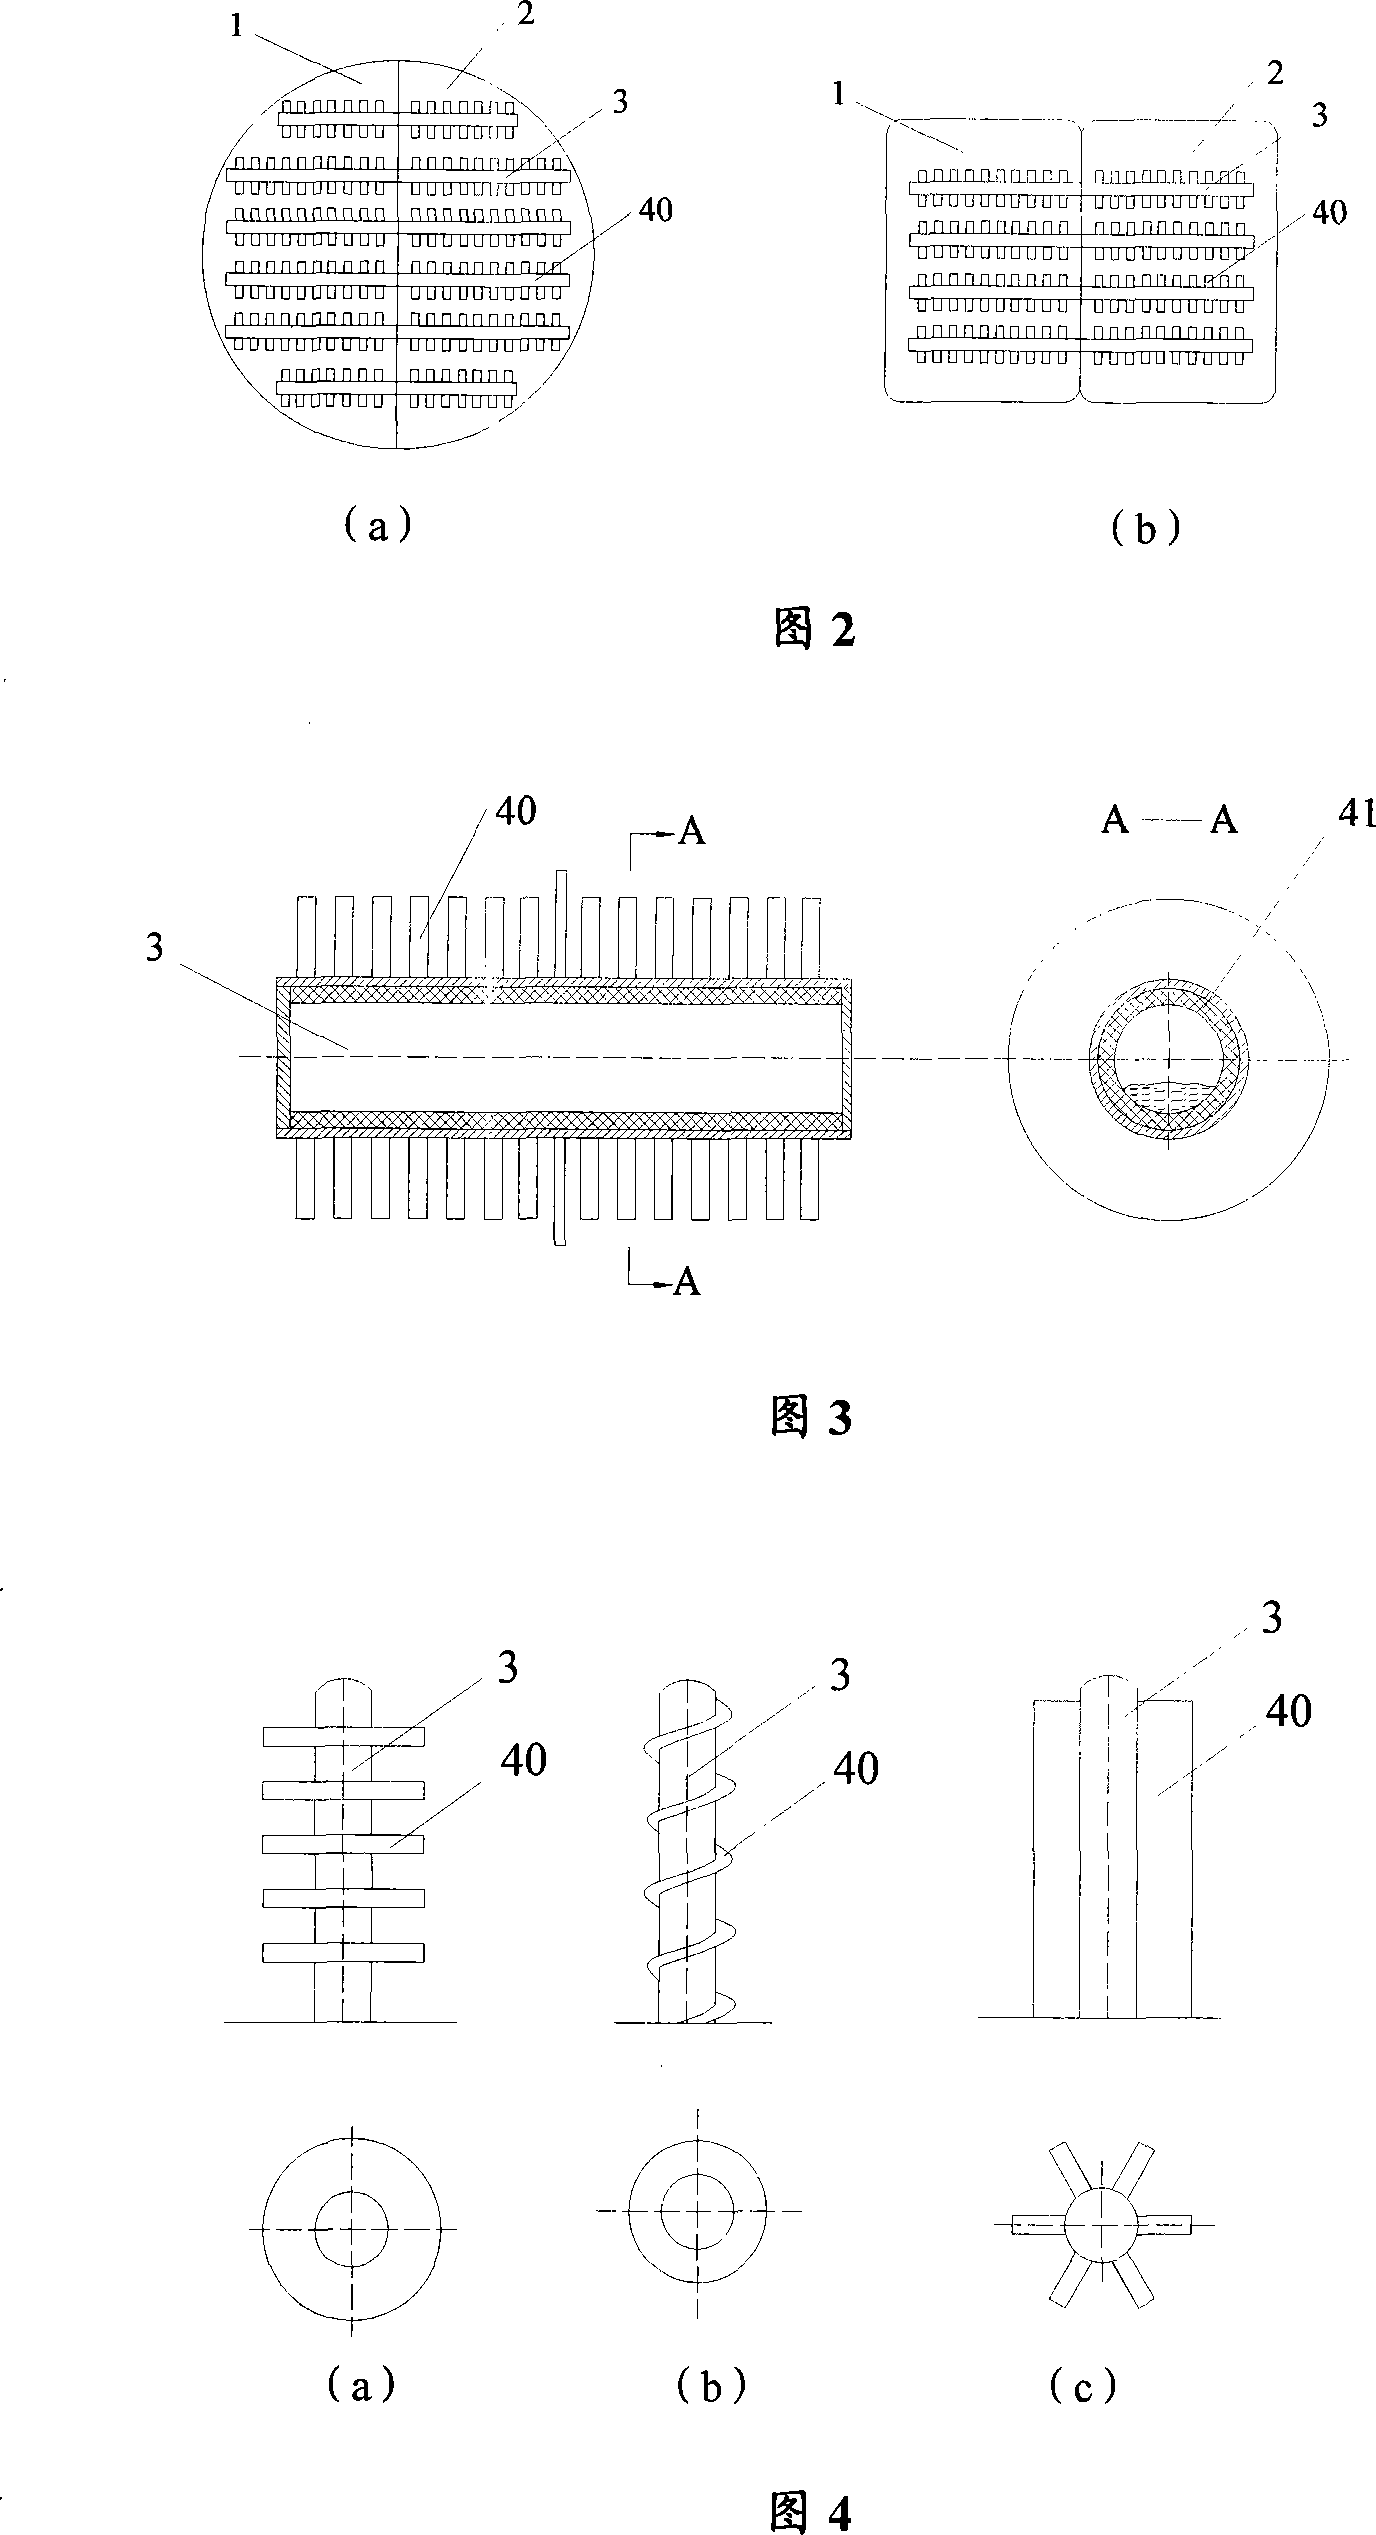 Double-fixing-bed biological matter reactor system of supplying heat by heat pipe